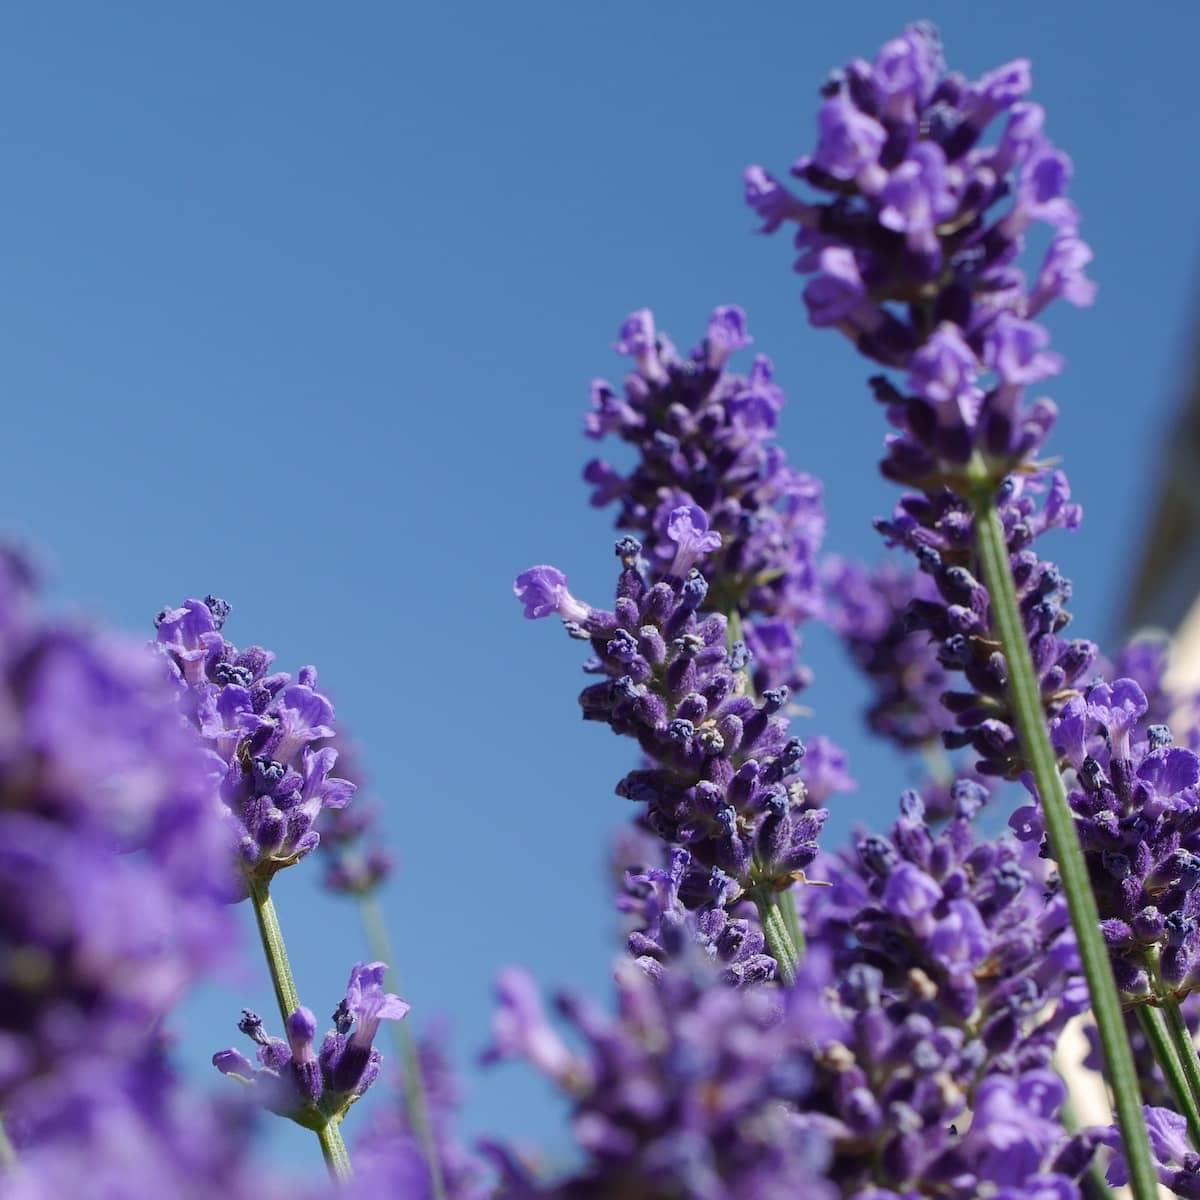 Purple lavender stem and buds in blue sky